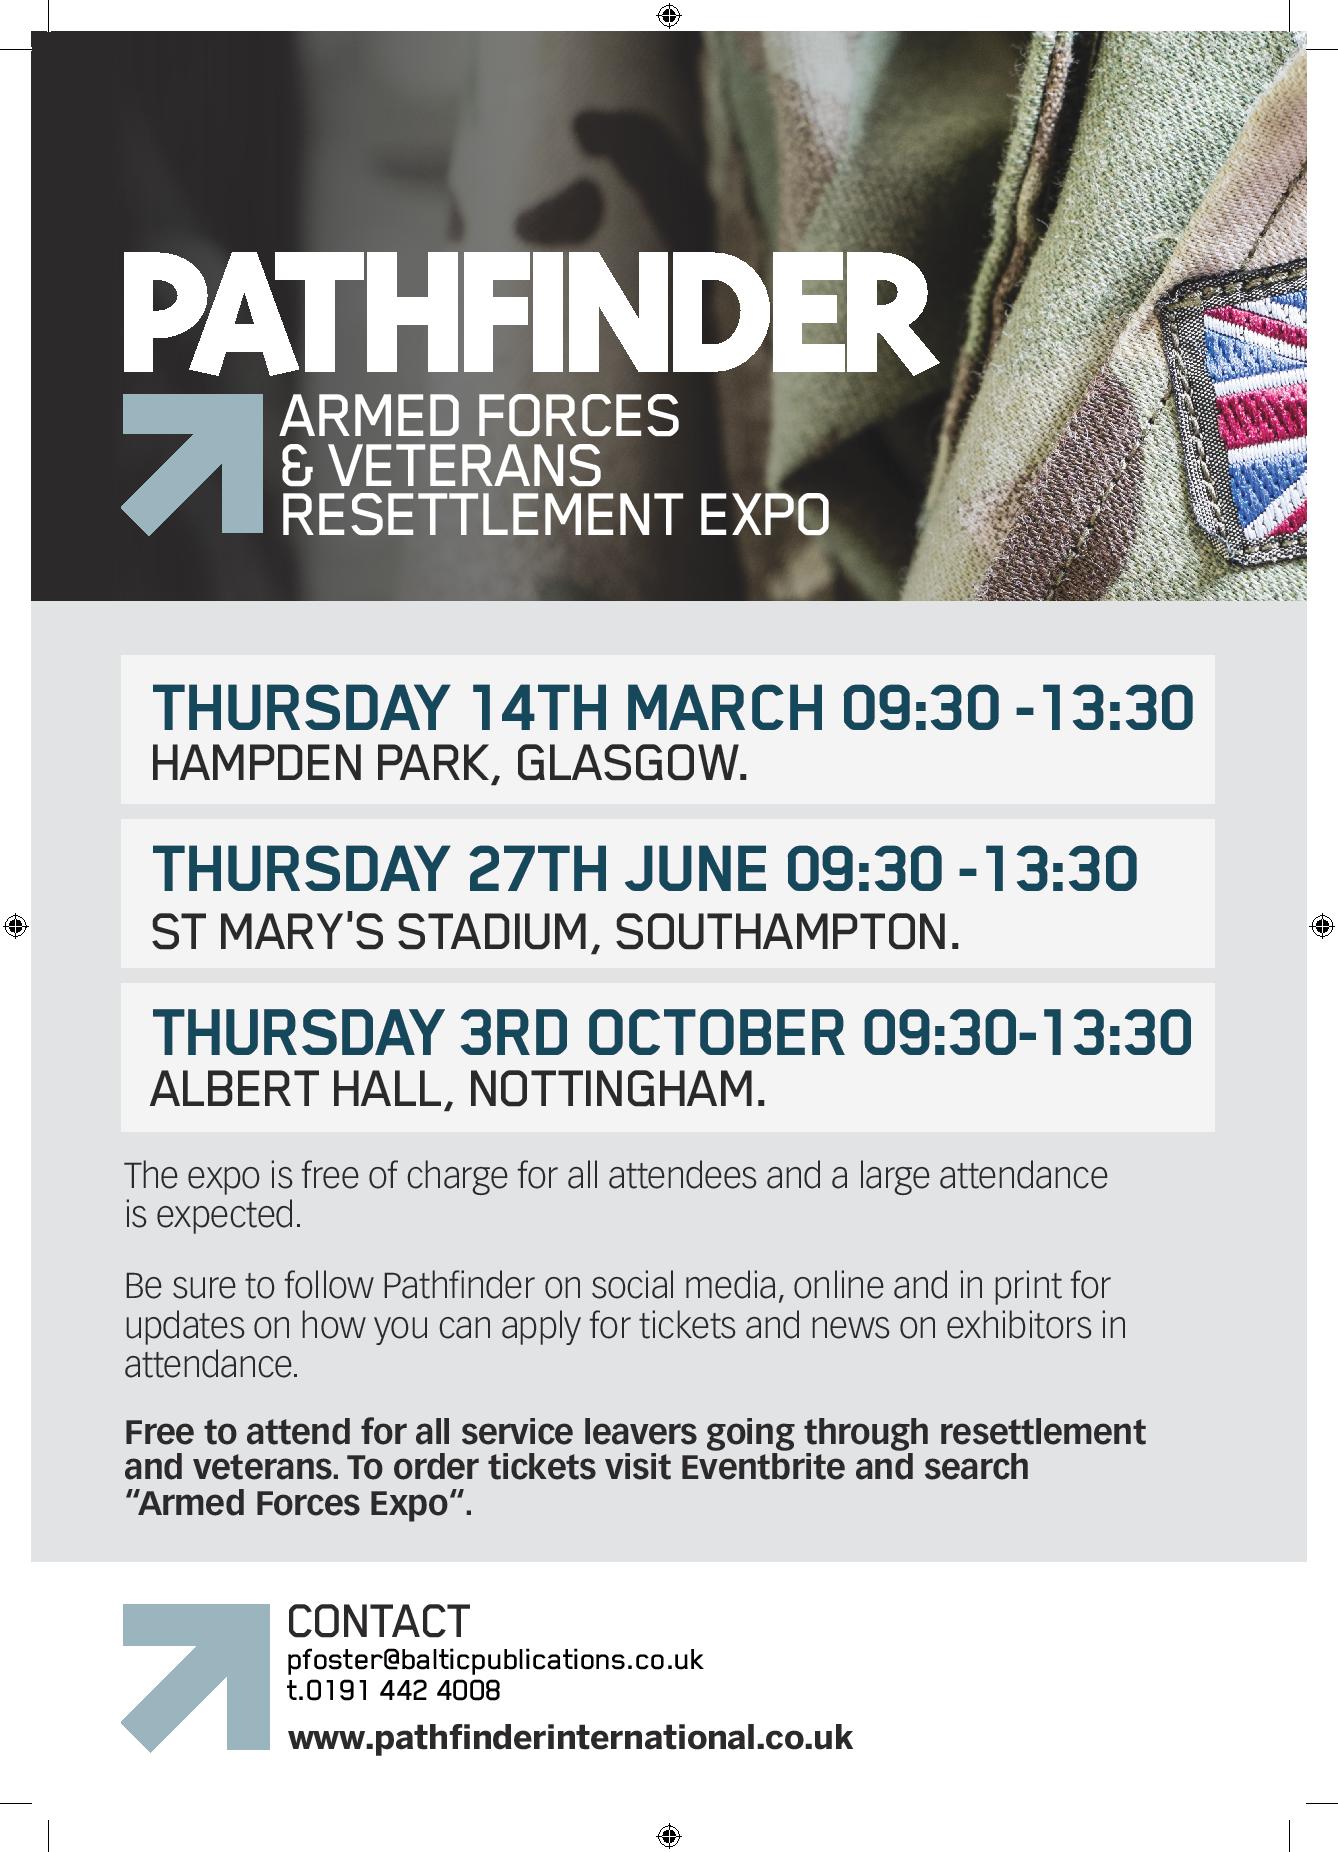 First Exhibitors Announced For Pathfinder’s Resettlement Expo In Glasgow